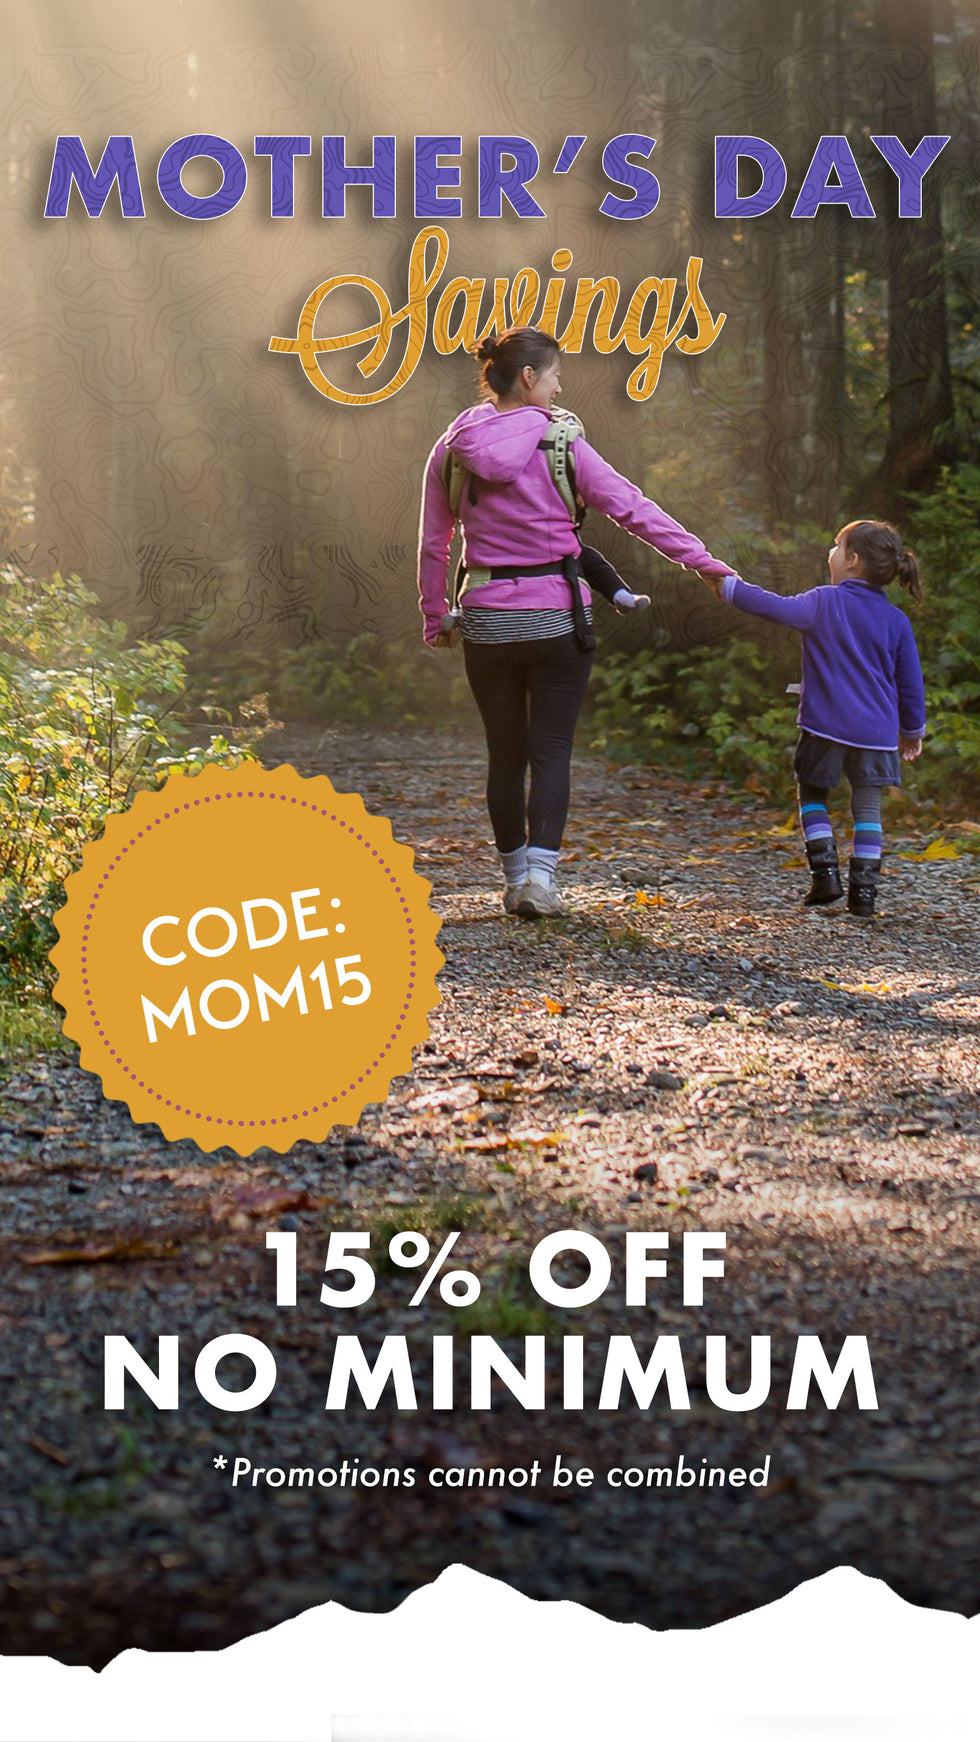 Mother's Day Savings 15% Off No Minimum Code MOM15